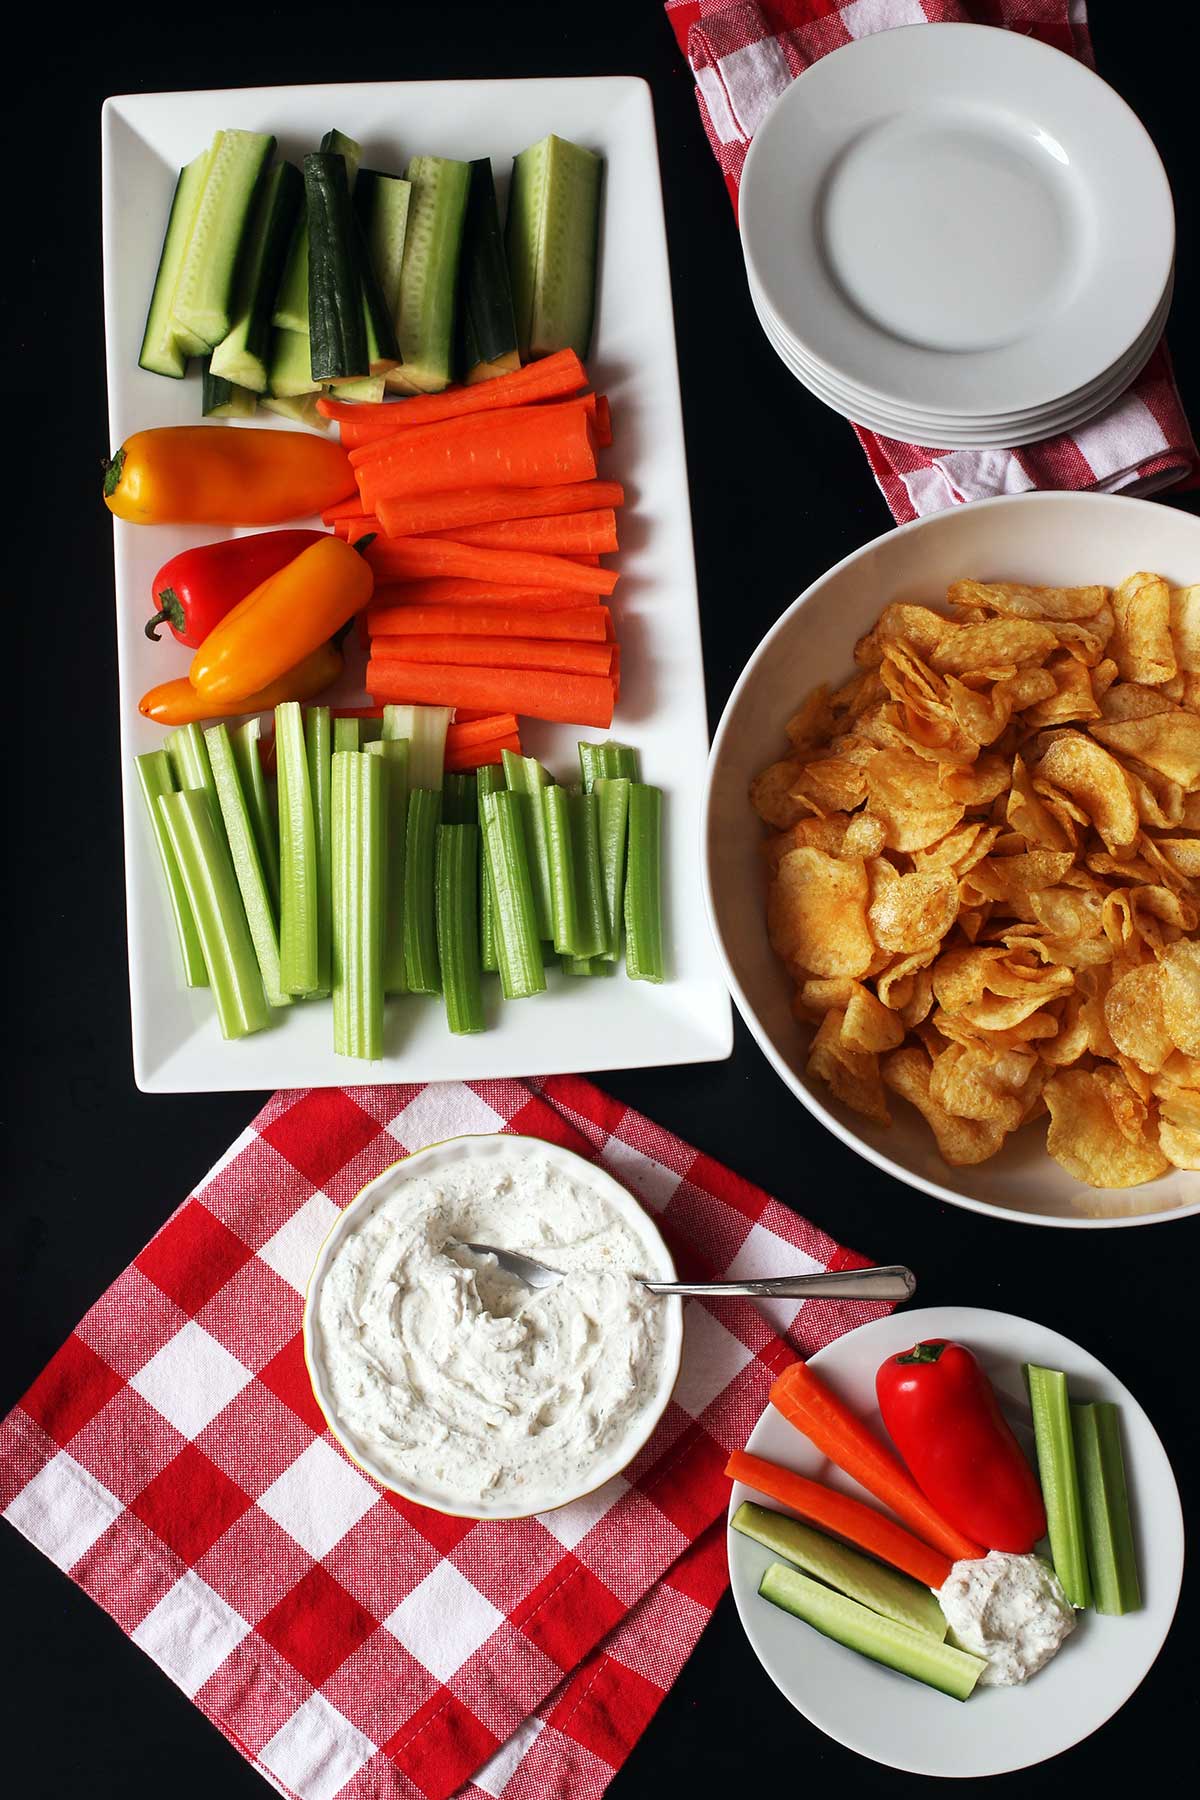 appetizer table set with veggies, chips, and dill dip with a red checked napkin.